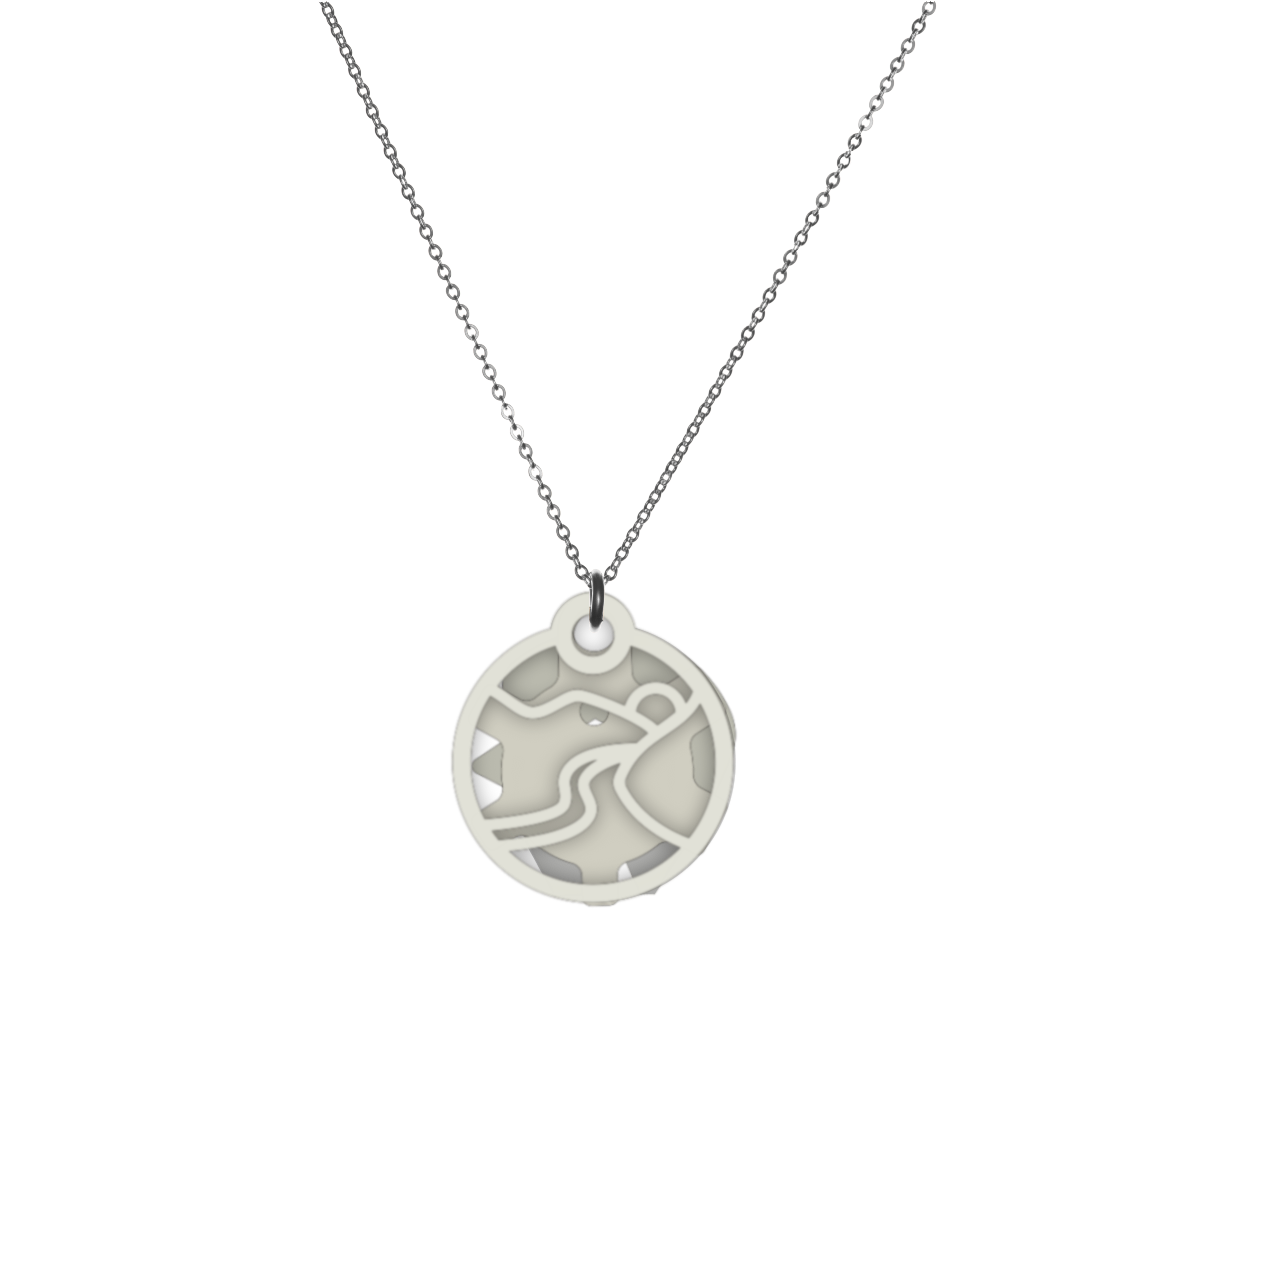 Tūlry 8-in-1 Stainless Necklace